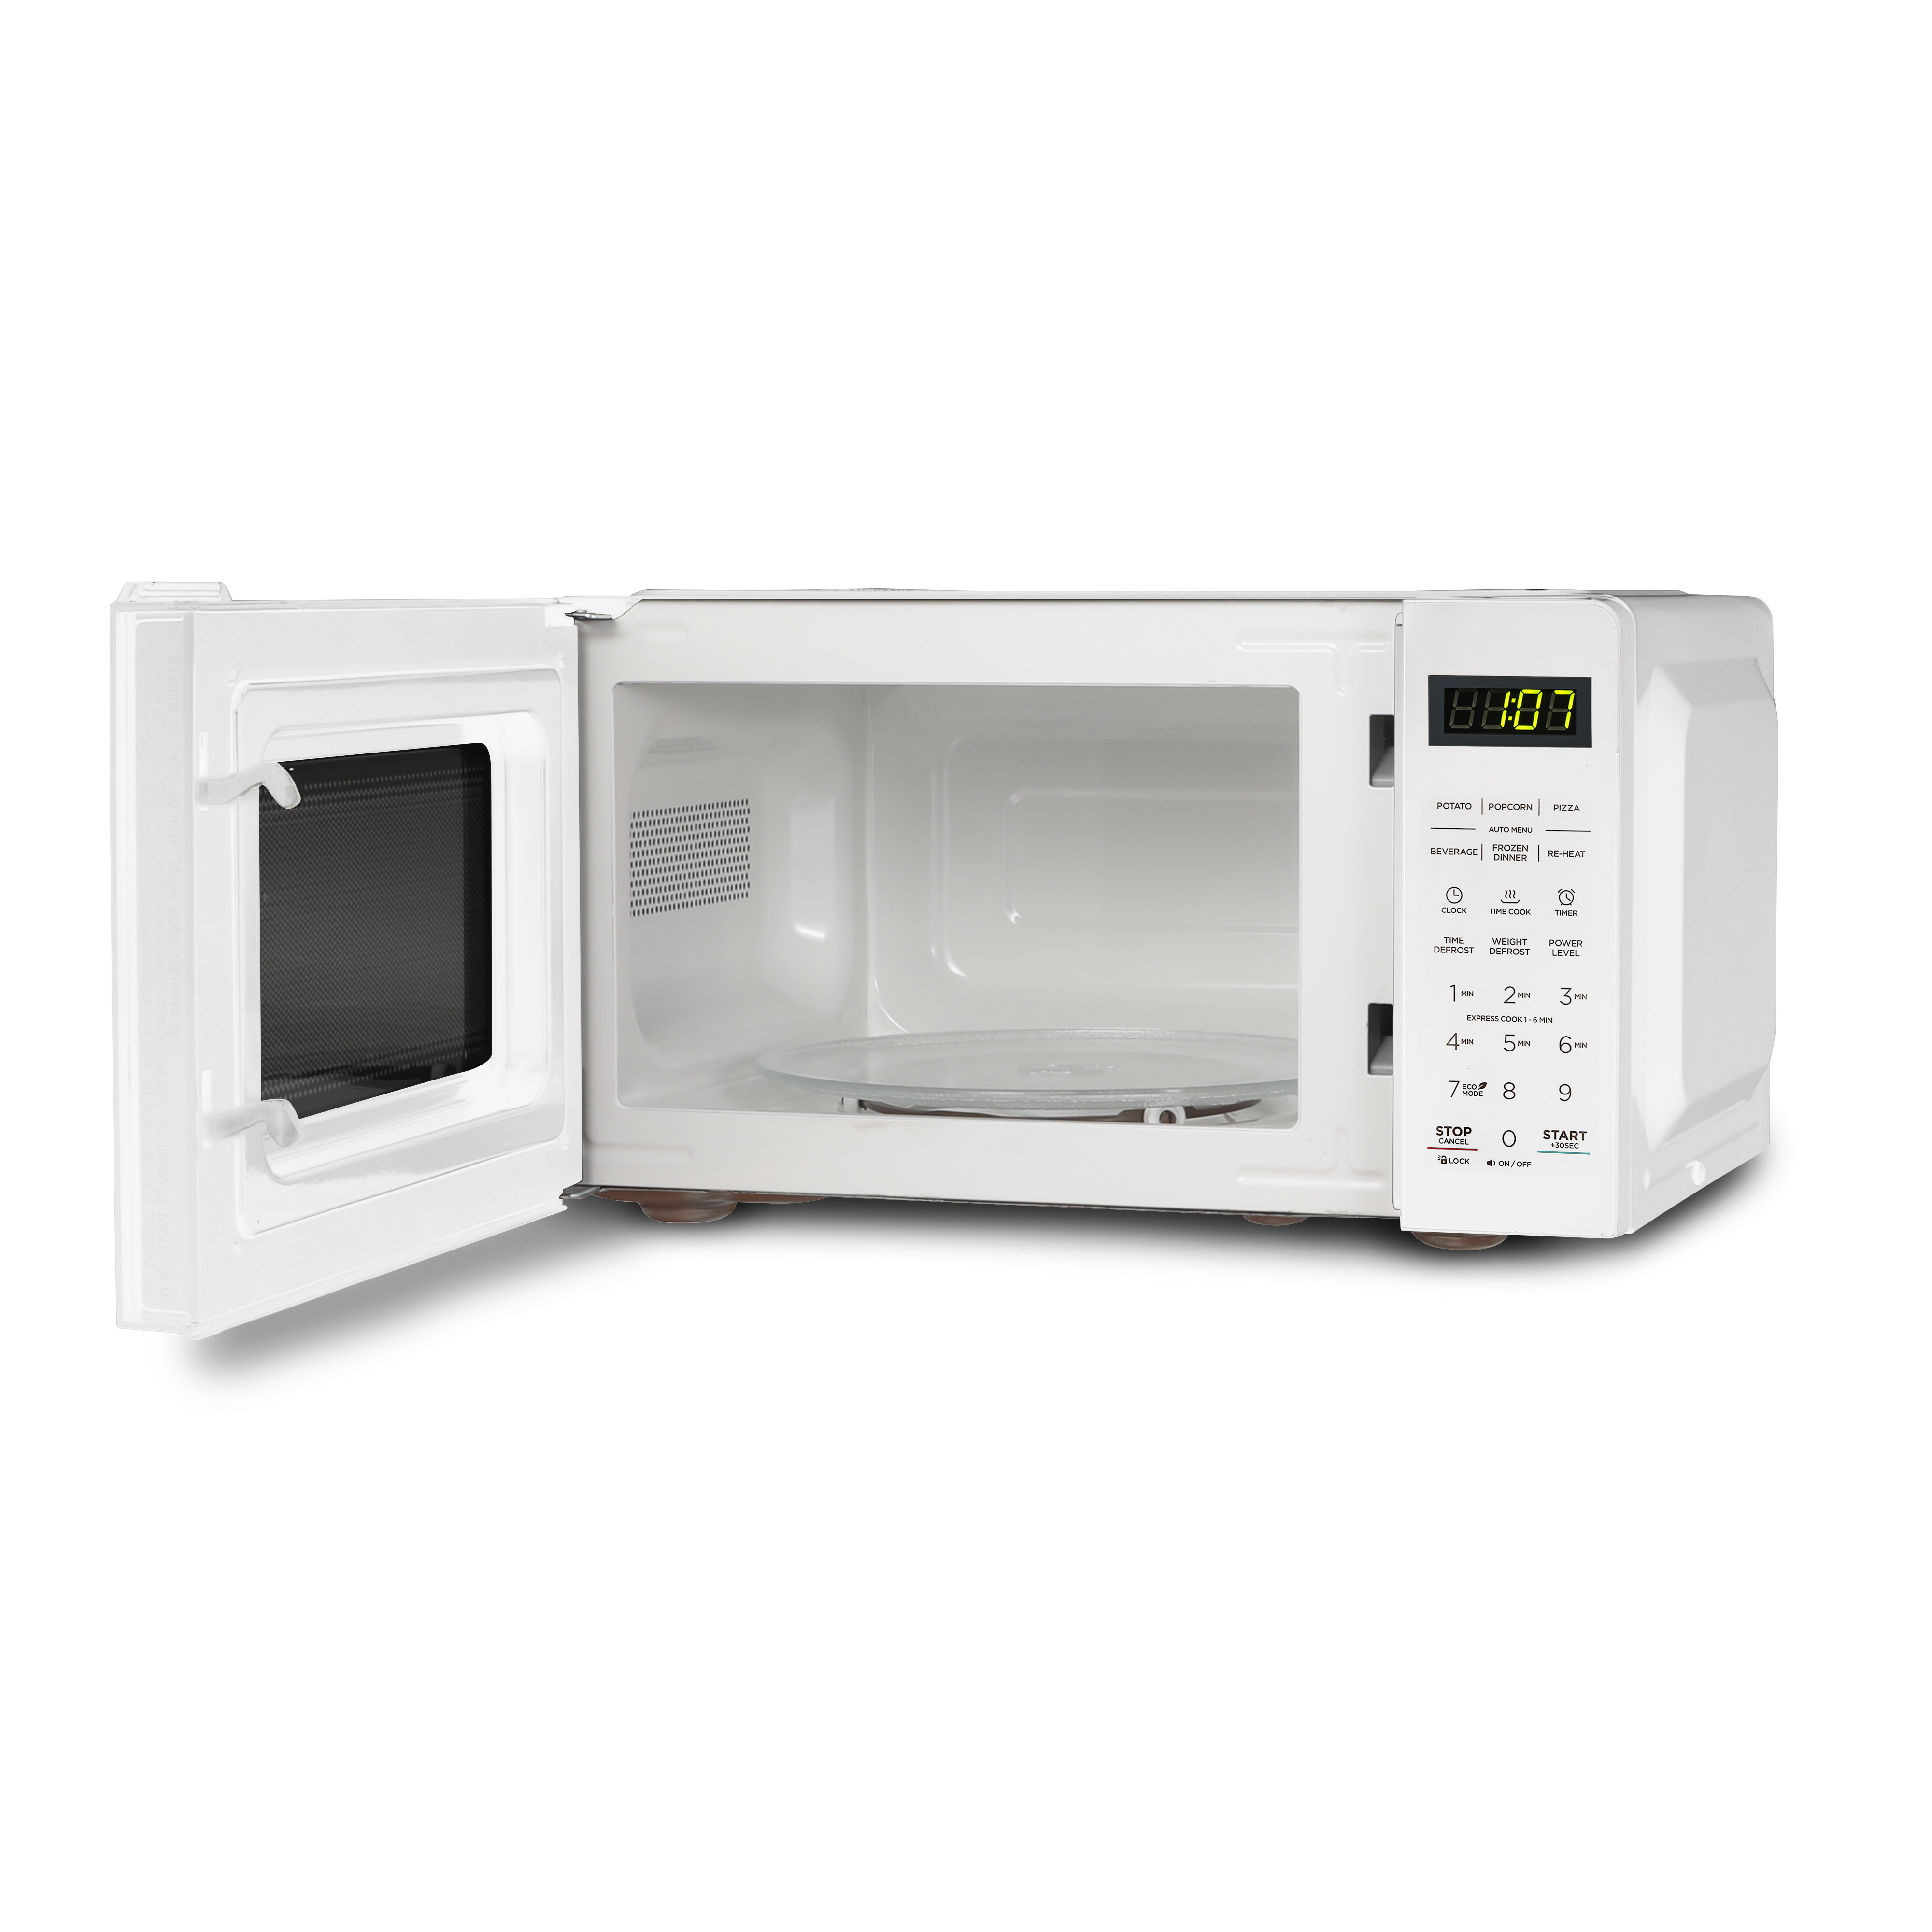 COMMERCIAL CHEF Small Microwave 0.9 Cu. Ft. Countertop Microwave with Touch  Controls & Digital Display, Stainless Steel Microwave & 10 Power Levels,  Outstanding Portable Microwave with Convenient Push 